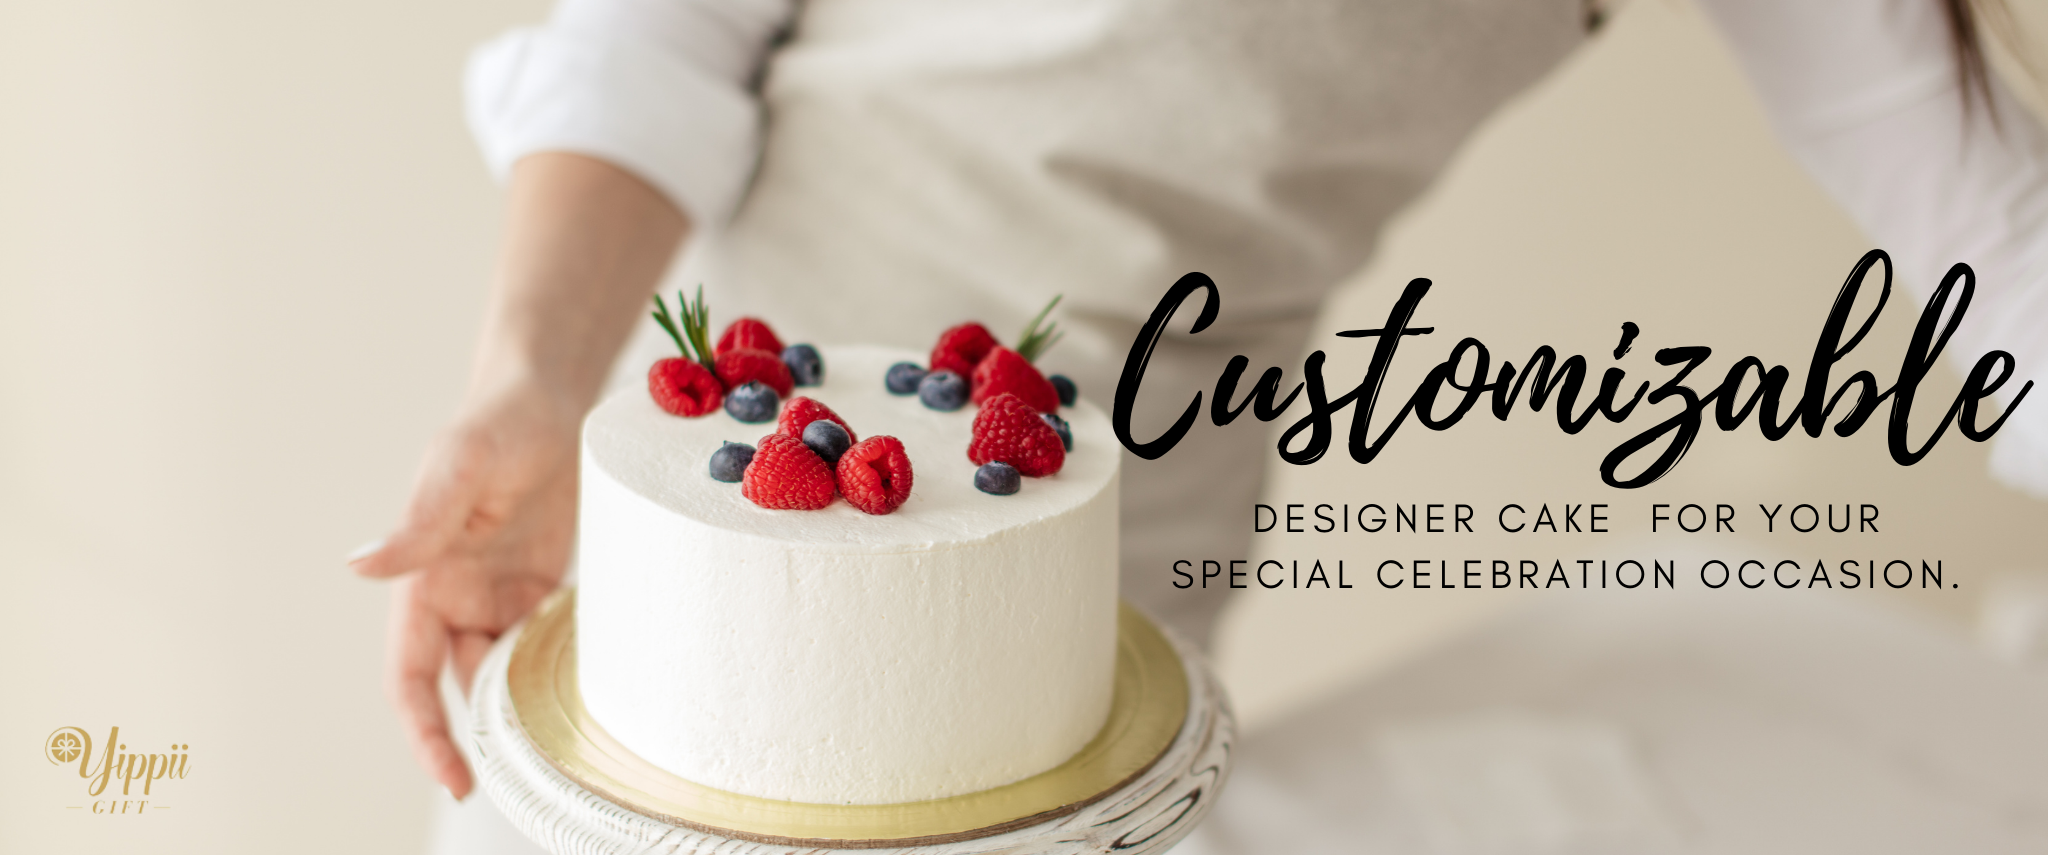 Yippii Gift | Customizable designer cake for your special celebration occasion